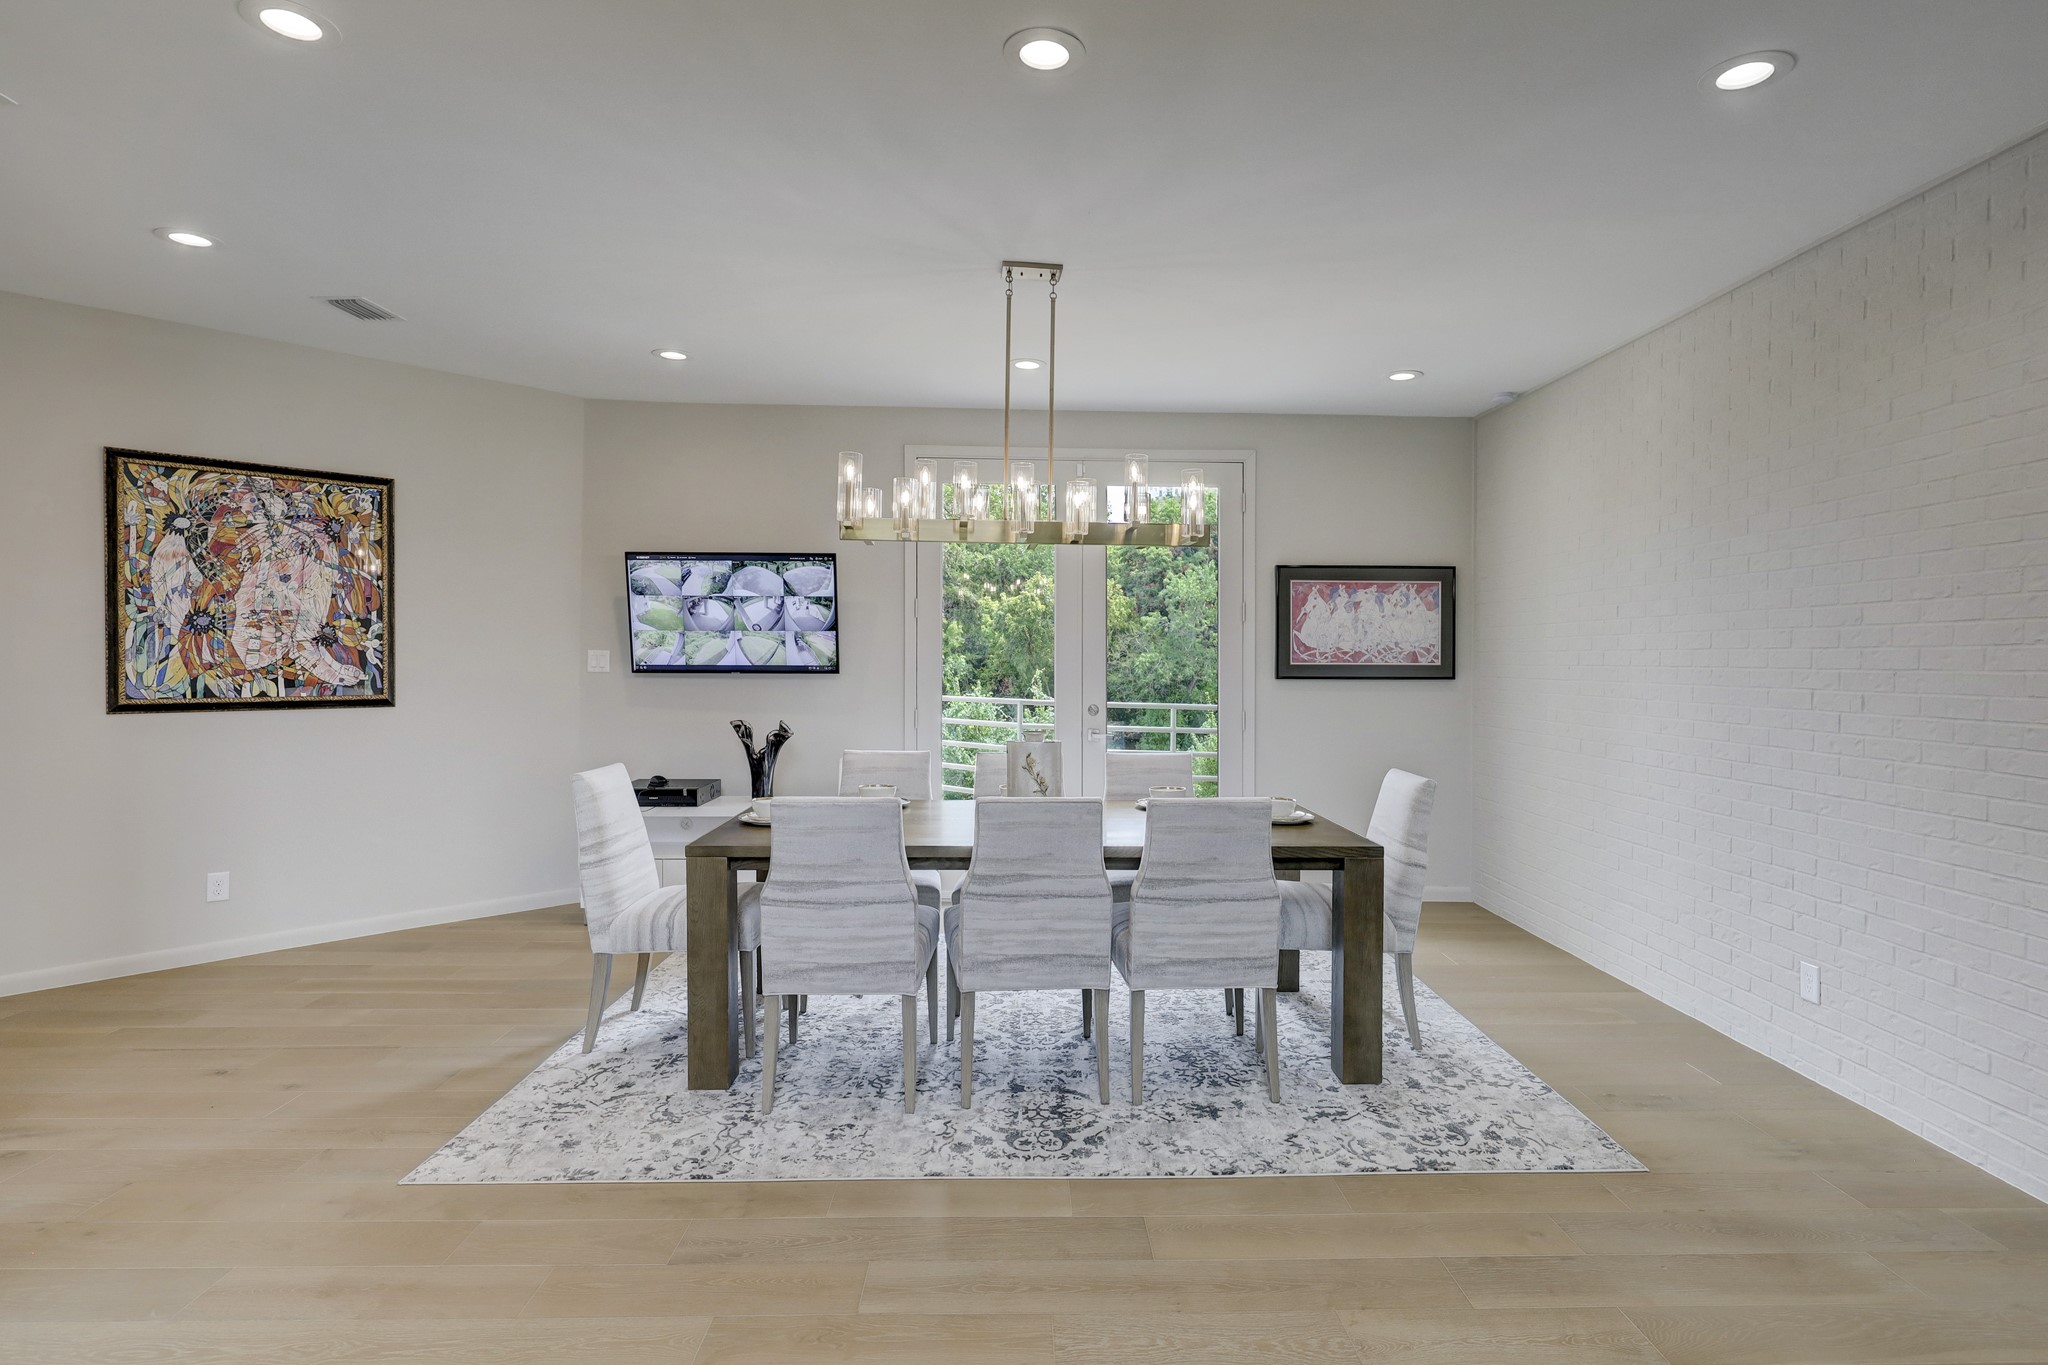 The second floor Formal Dining Room features custom chandelier, recessed LED lights, and opens to the second floor balcony.